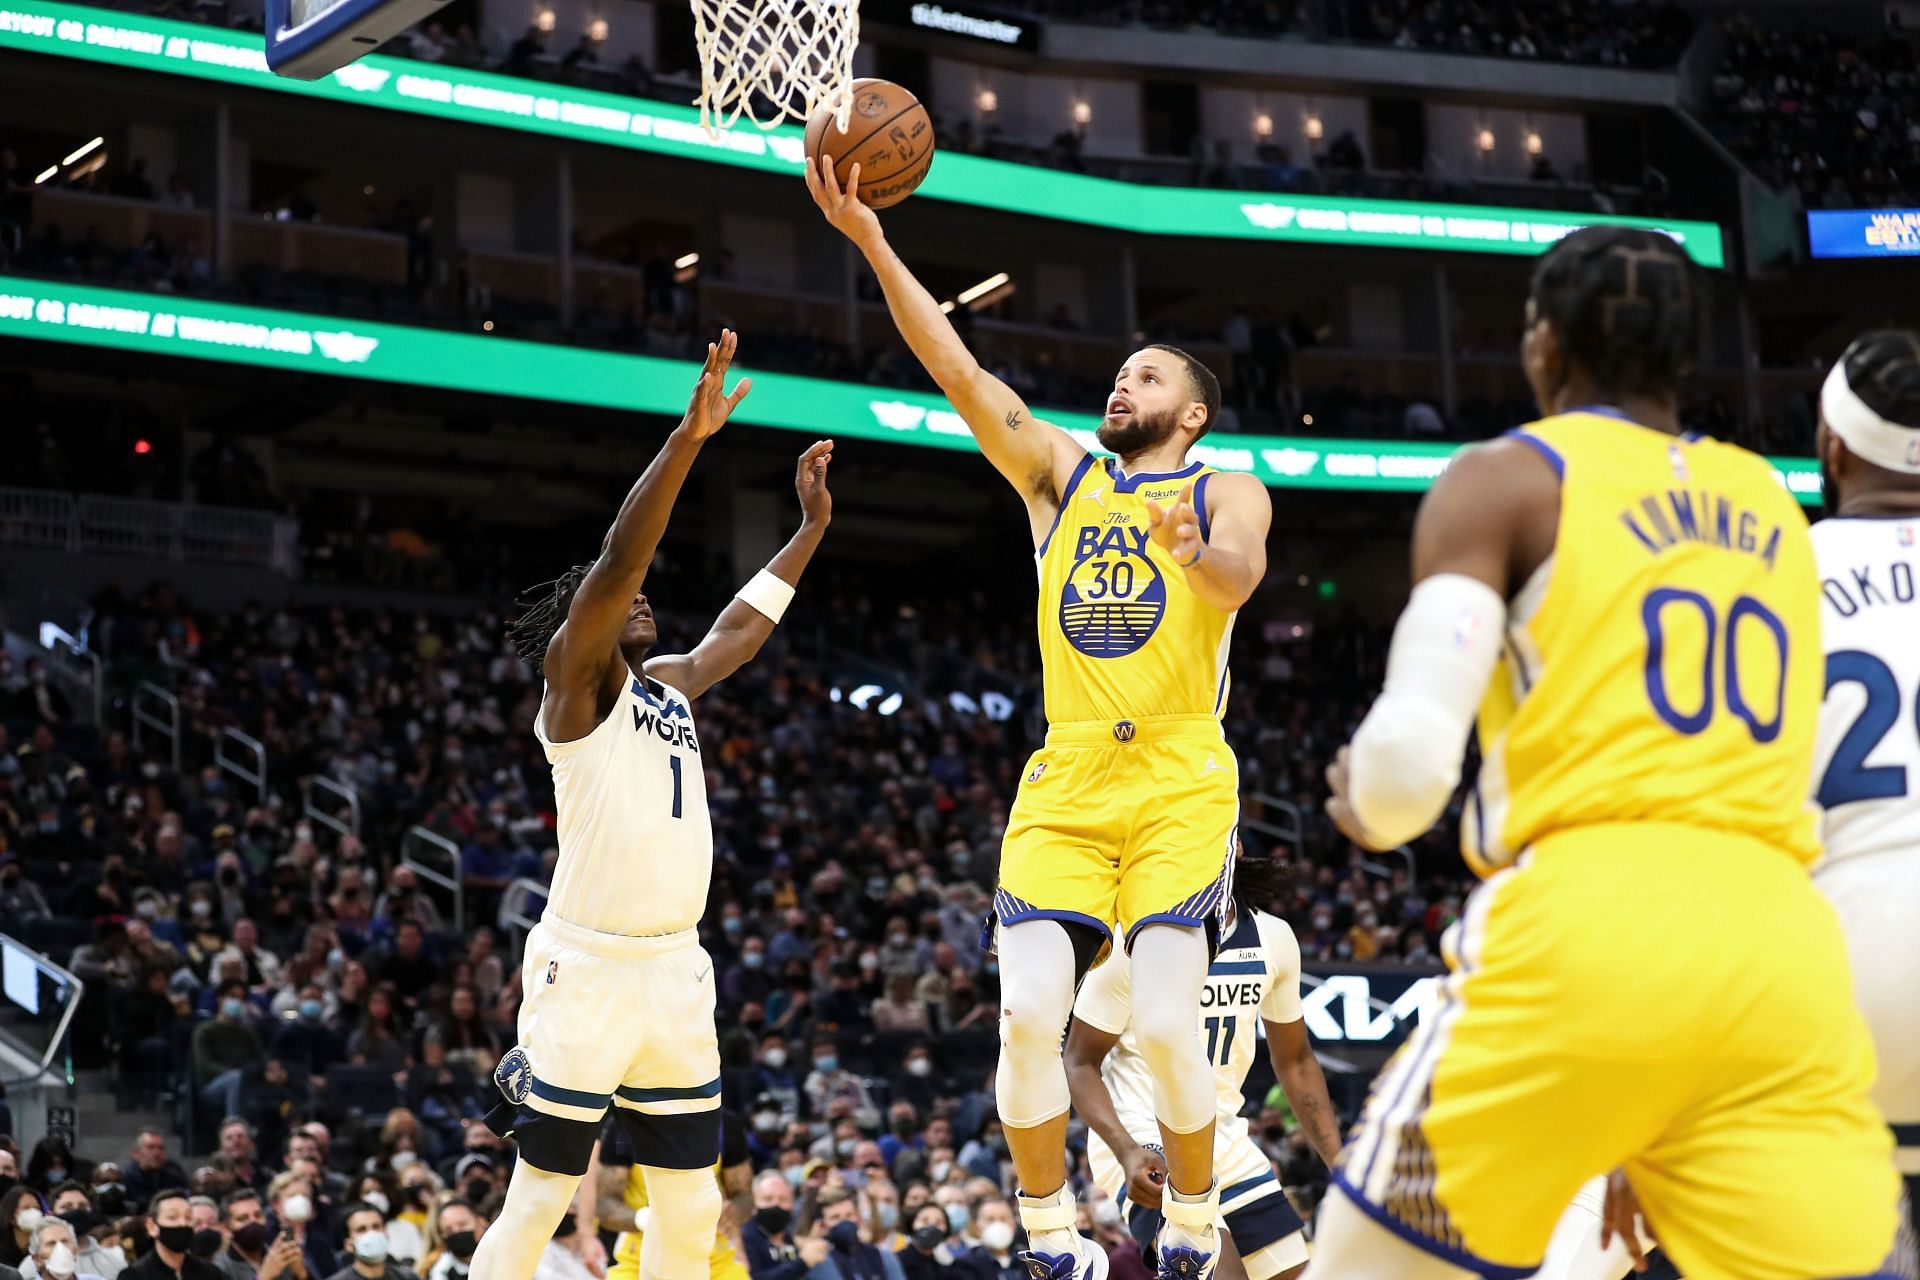 Golden State Warriors guard Stephen Curry going up for a layup